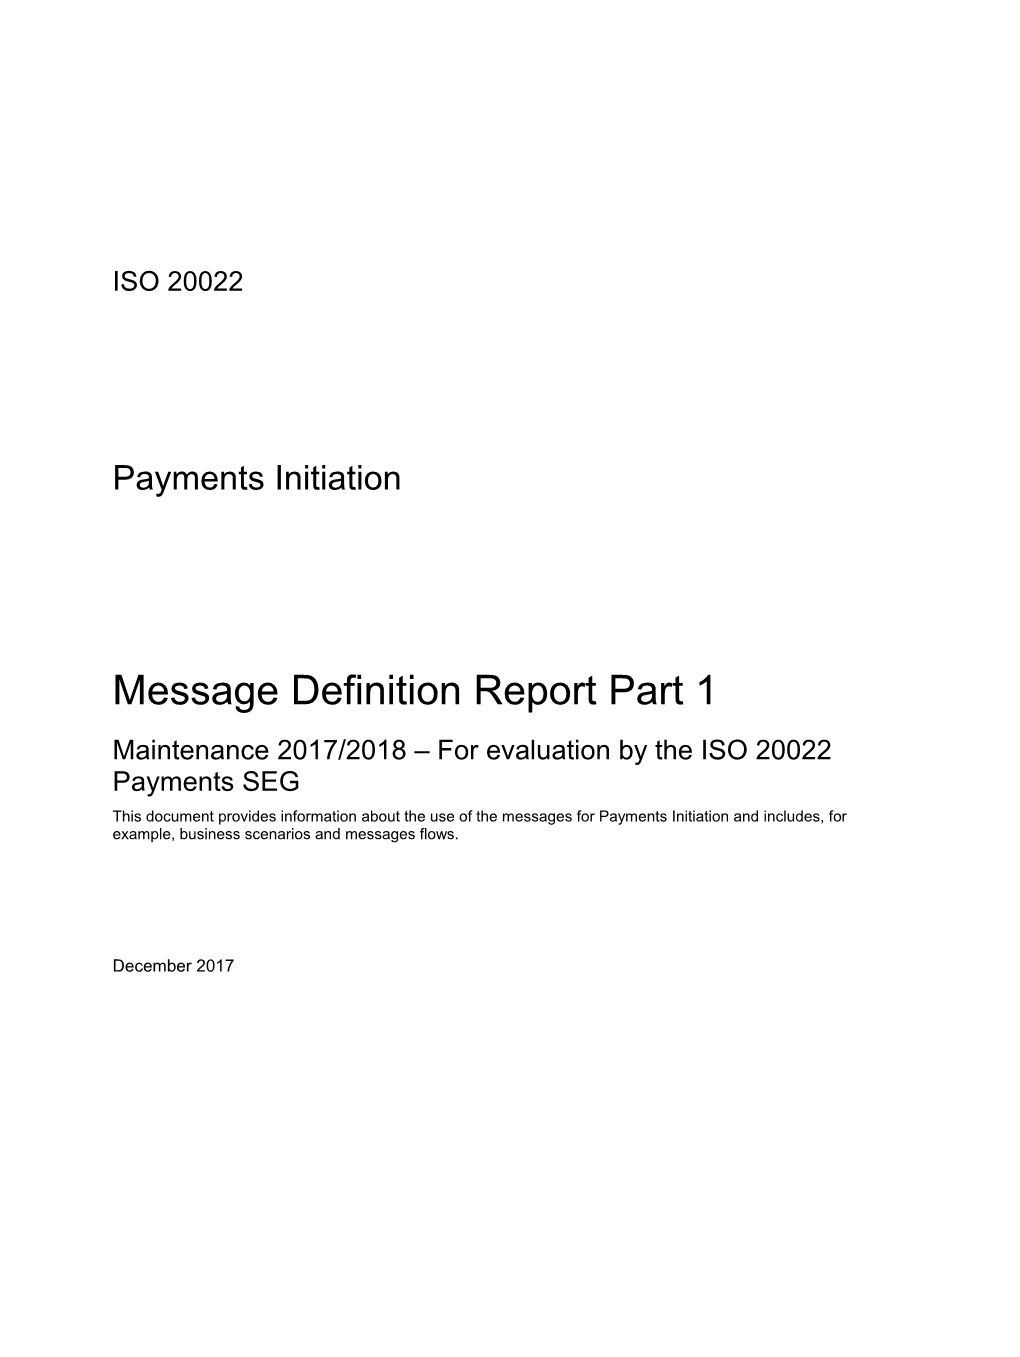 ISO 20022 MDR Part 1 - Payment Initiation